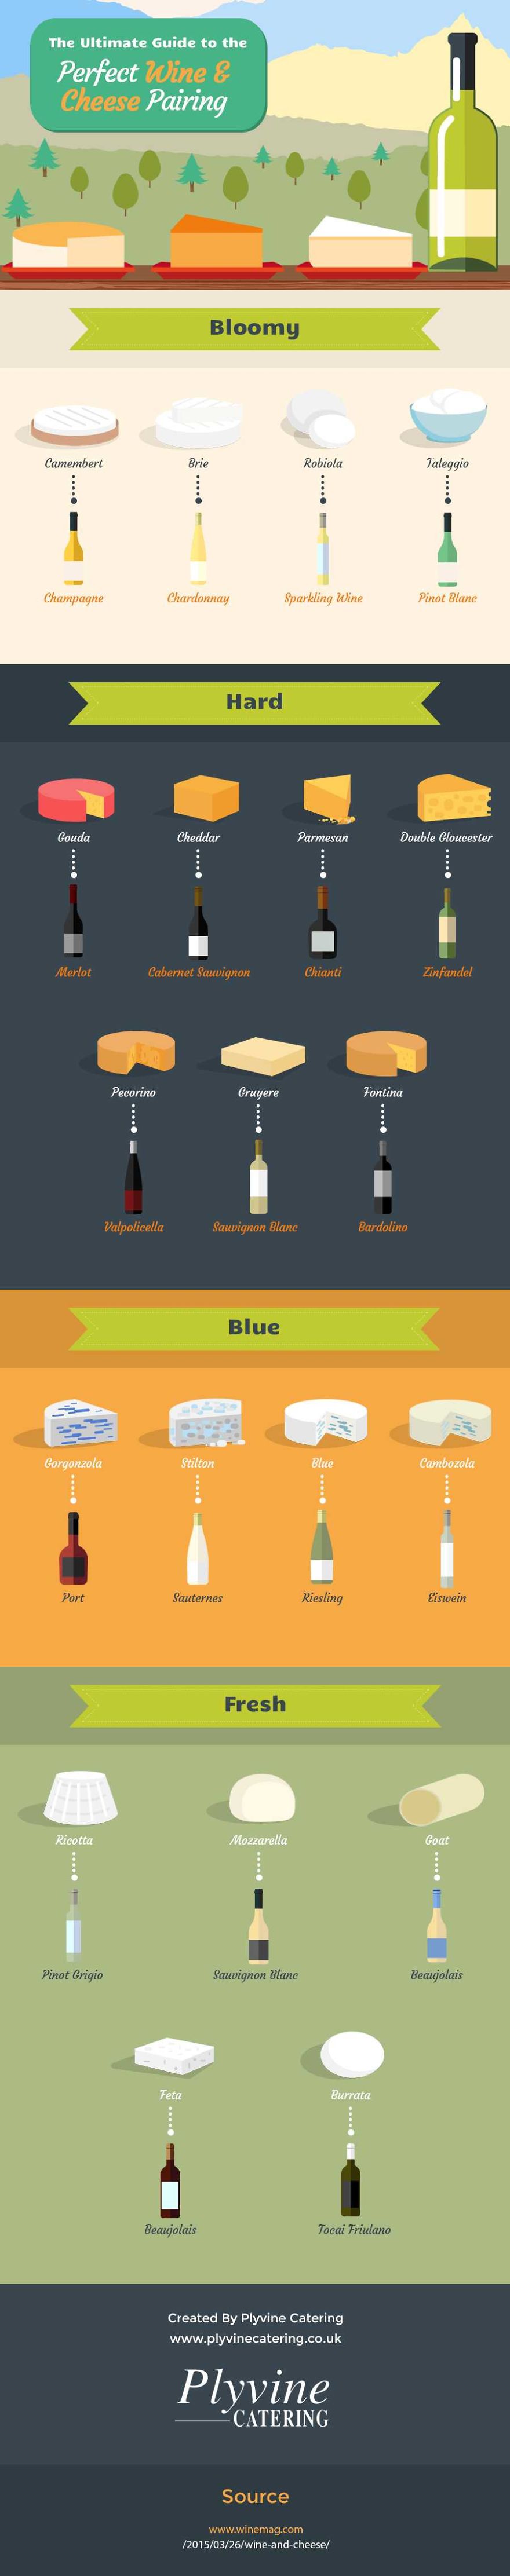 The Ultimate Guide To The Perfect Wine & Cheese Pairing